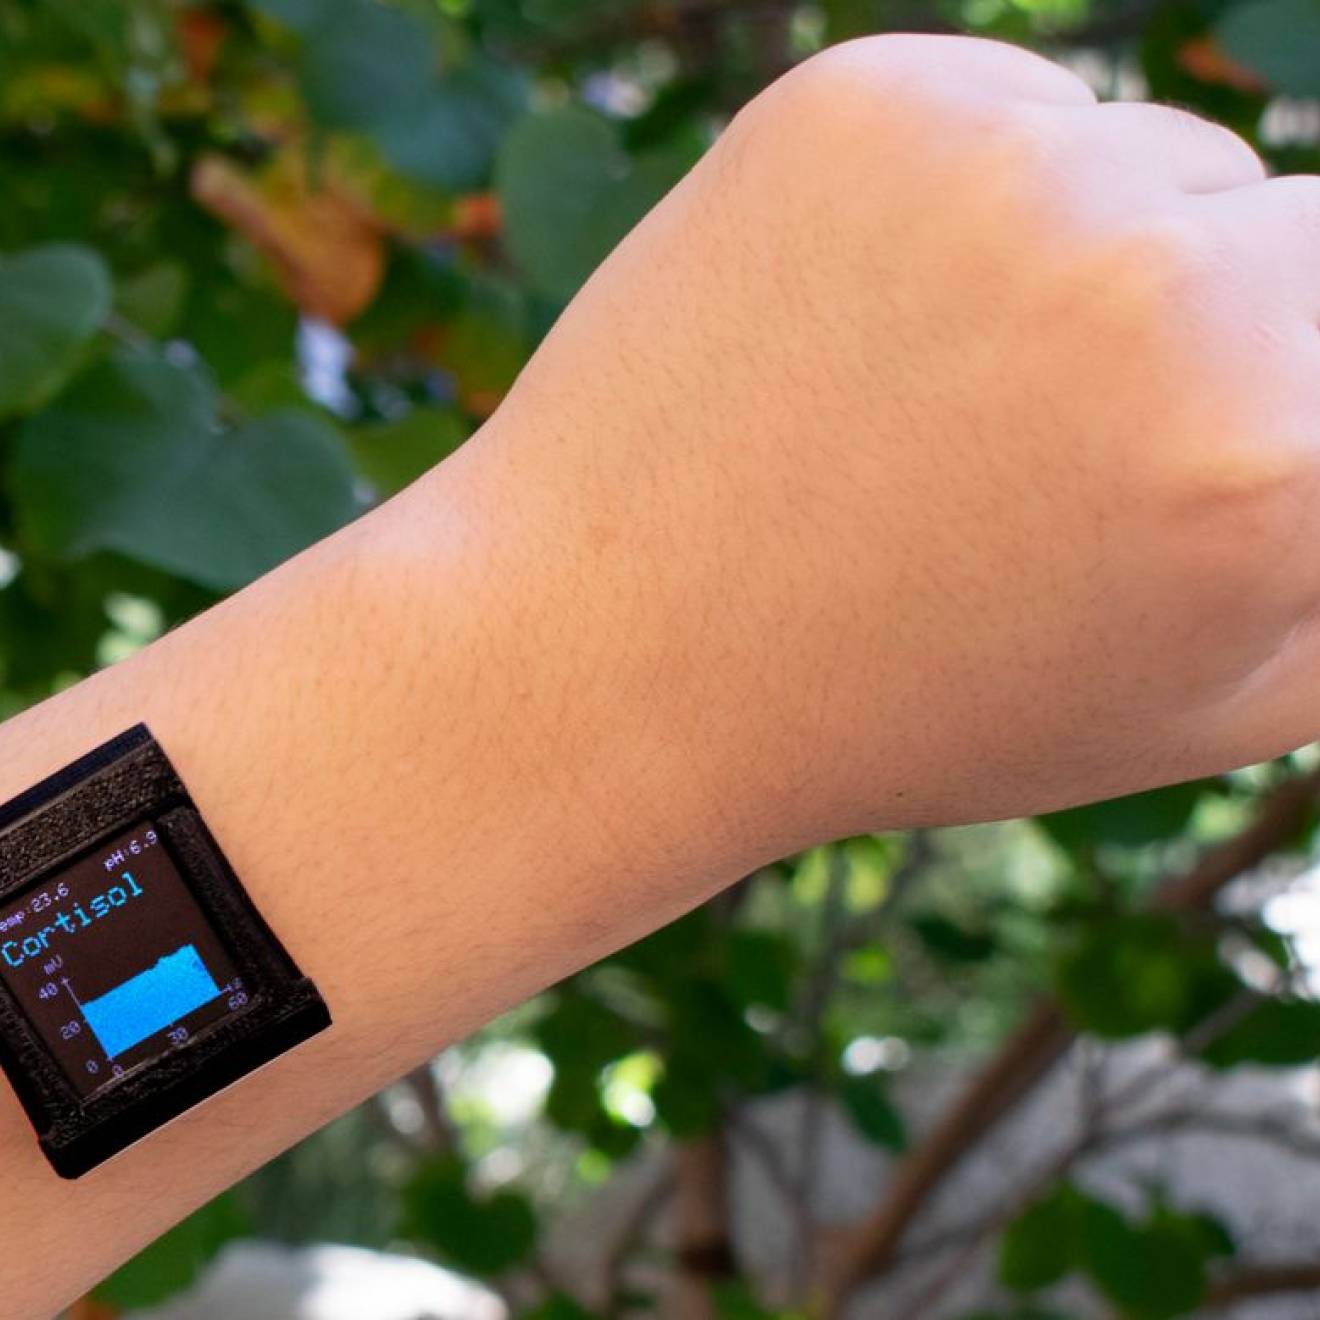 A smart watch on a wrist with cortisol reading displayed